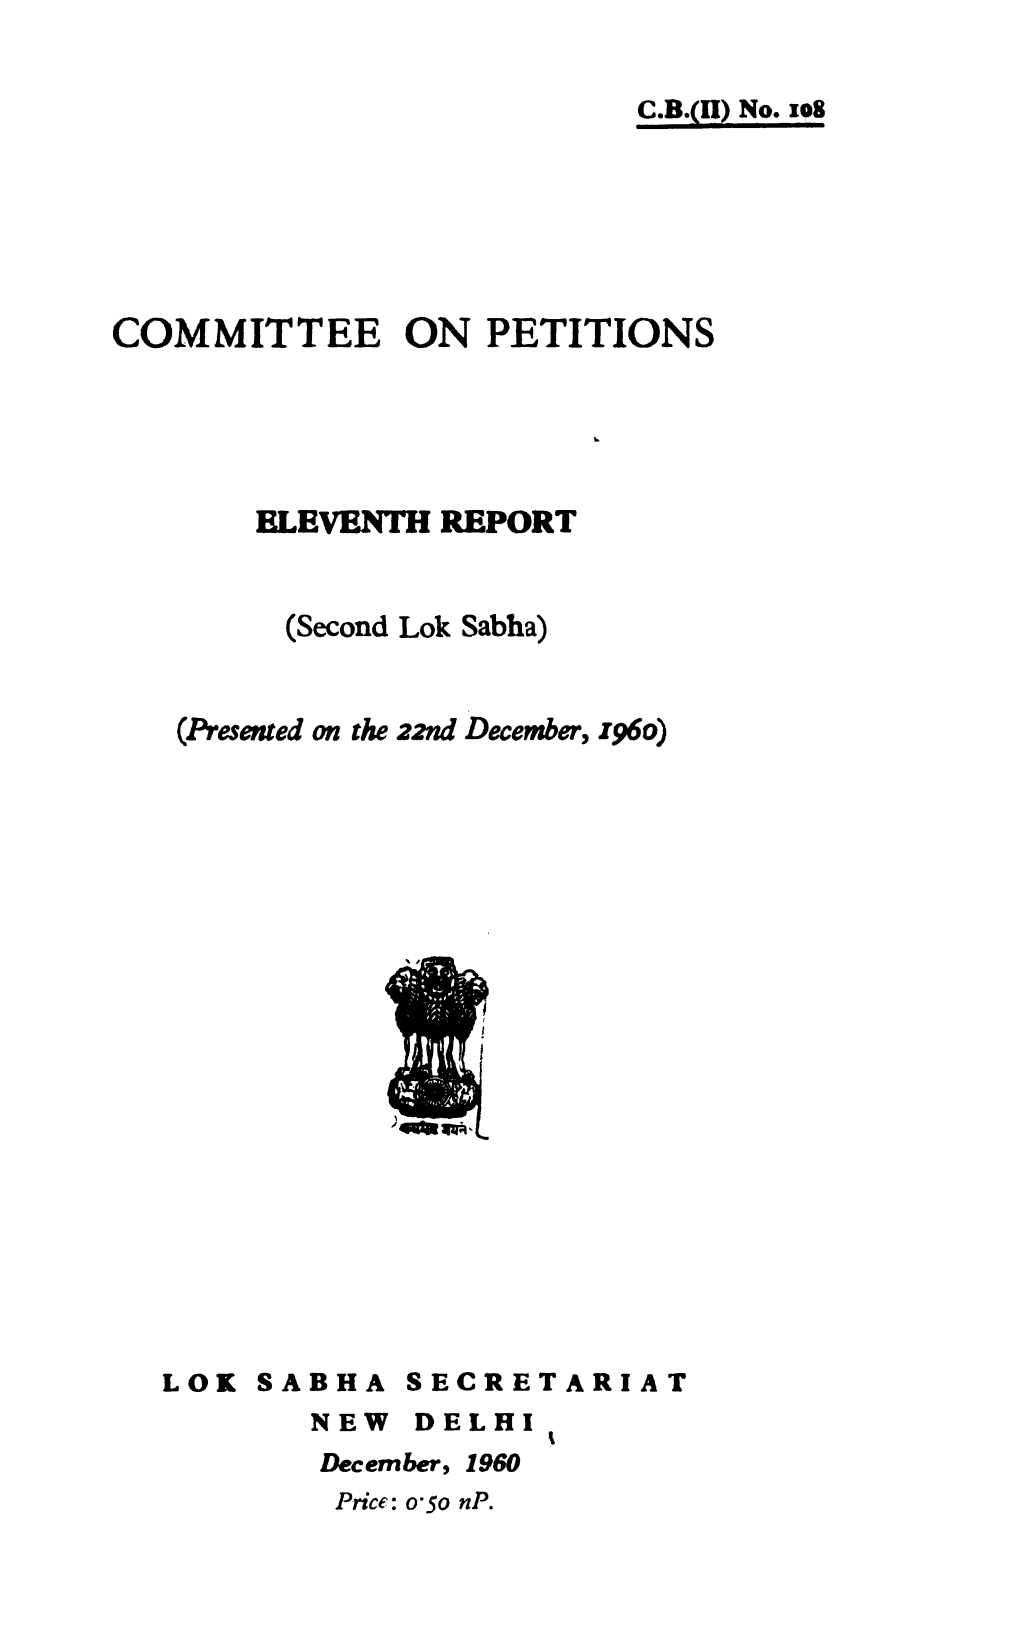 Committee on Petitions